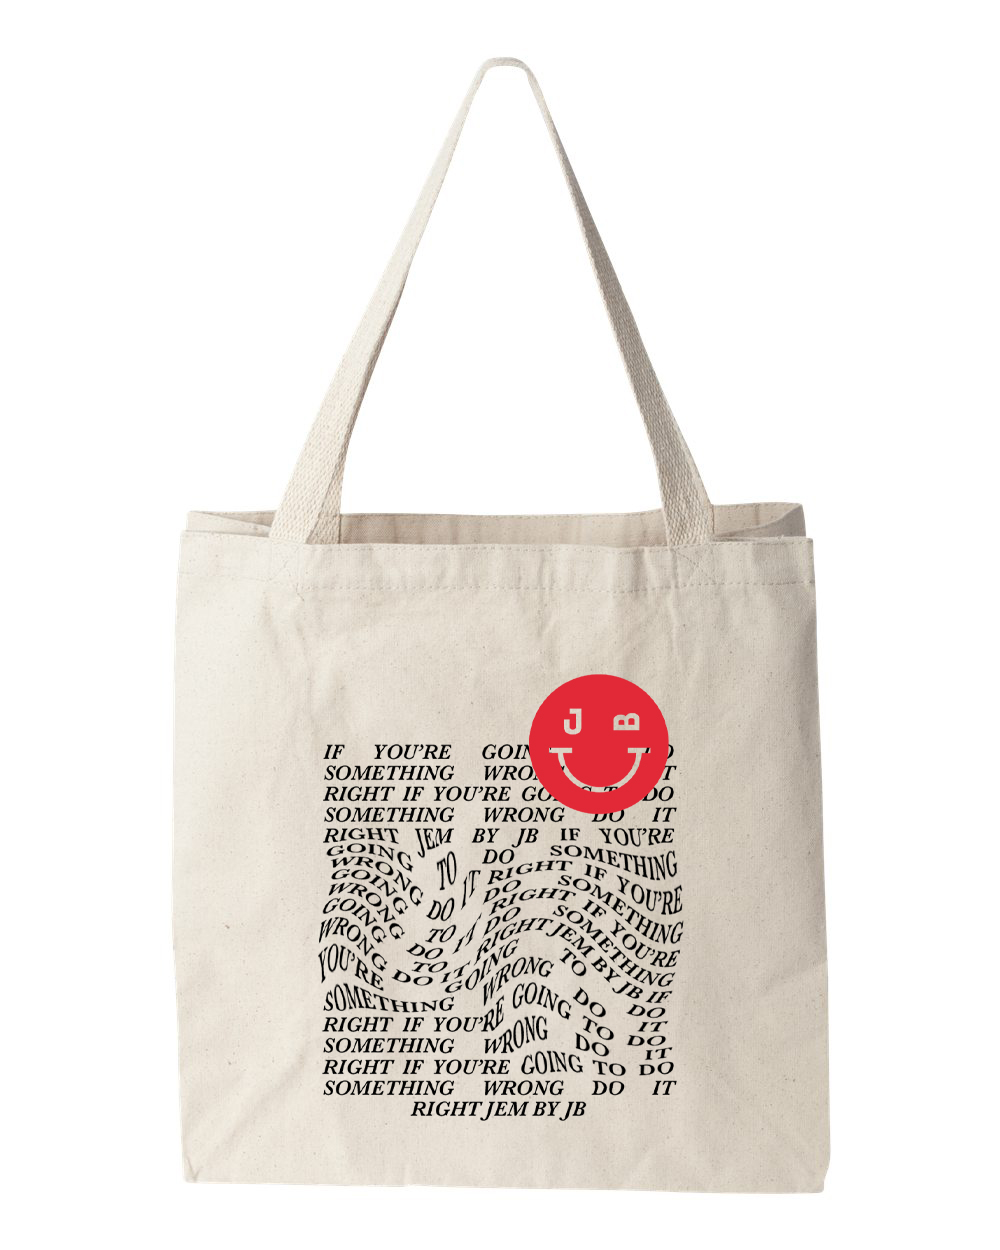 custom design of Liberty Bags 8503-12 Ounce Cotton Canvas Tote